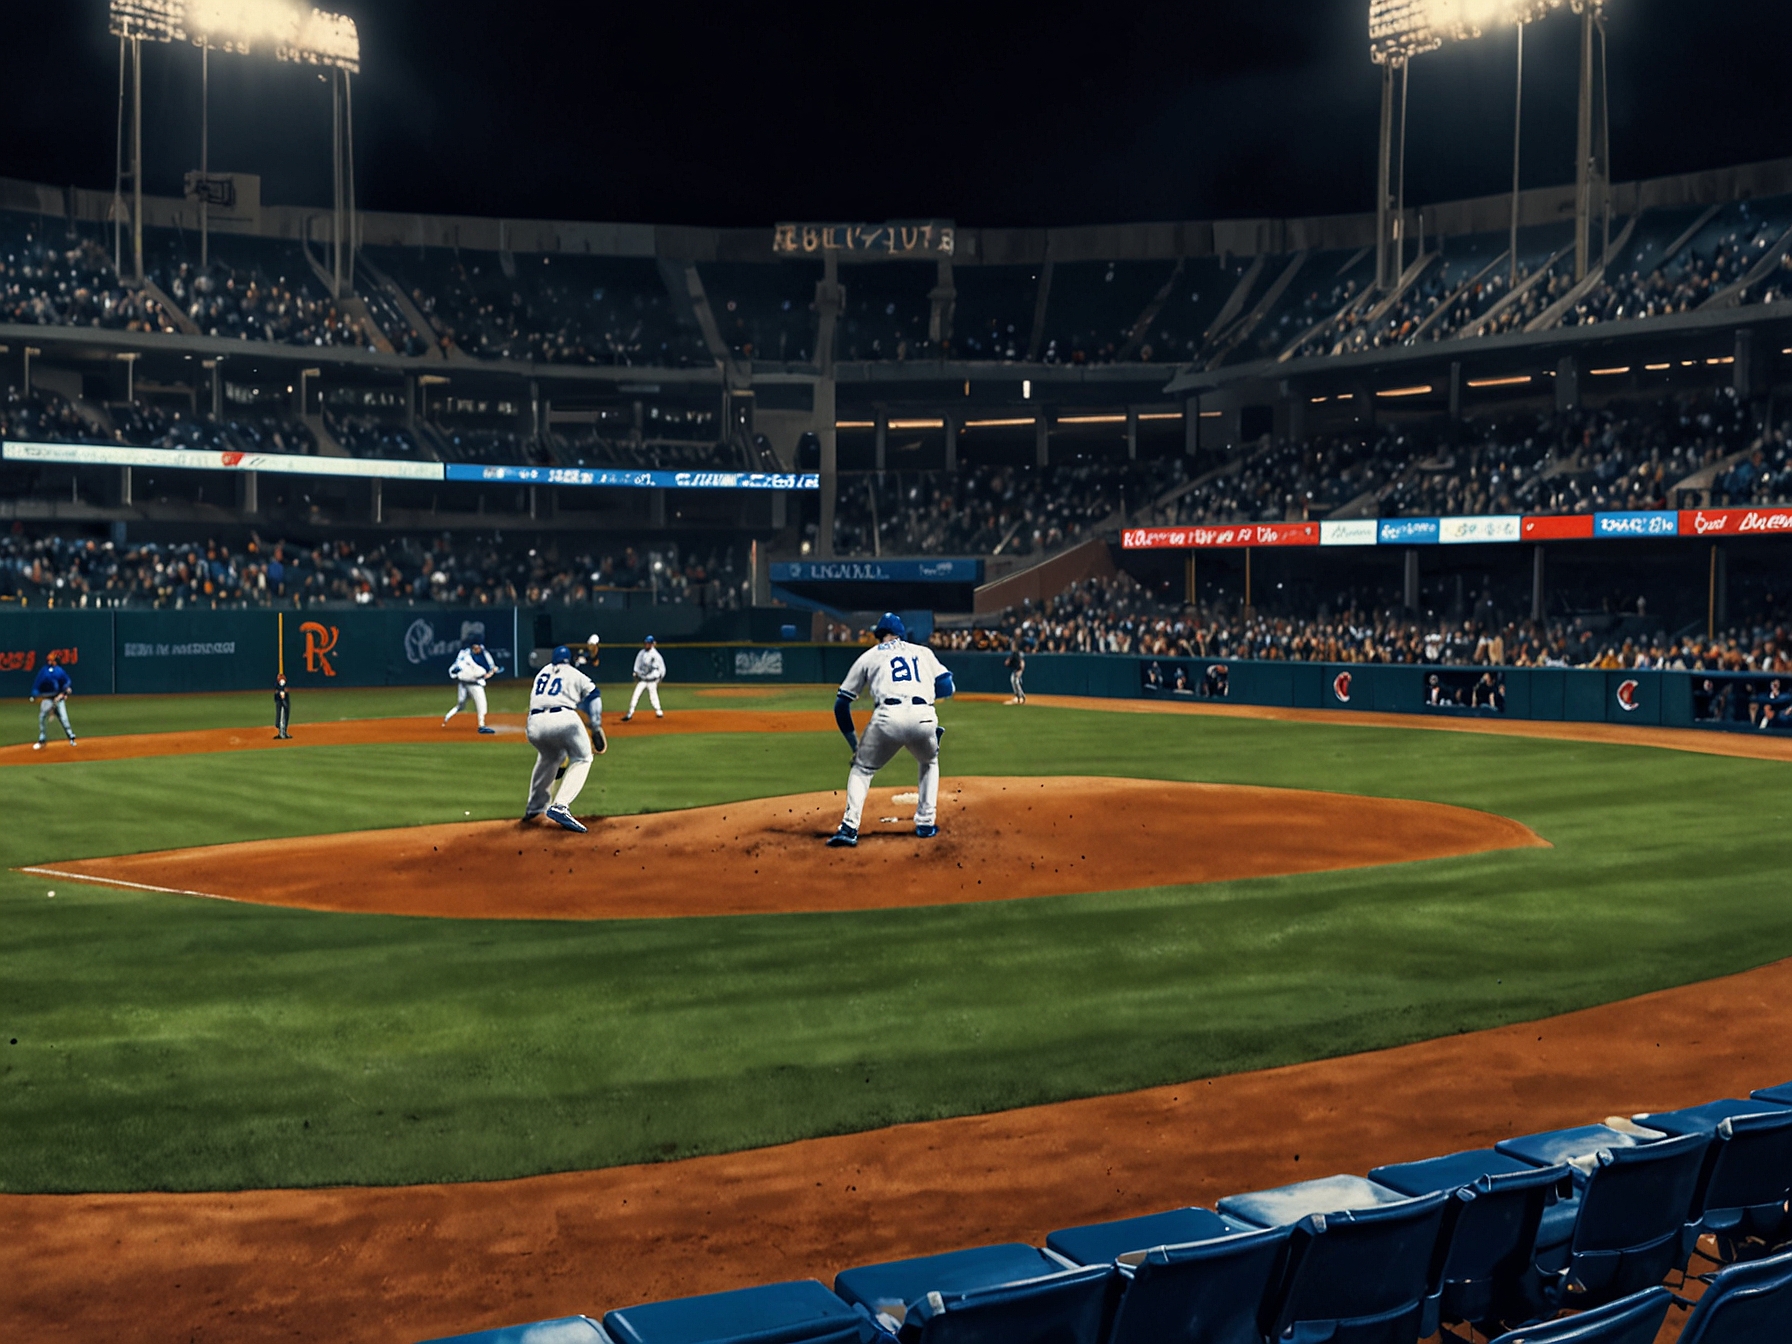 Kansas City Royals' bullpen in action during a game, illustrating the area where Kris Bubic will be making his rehab appearances. The focus is on teamwork and strategic pitching.